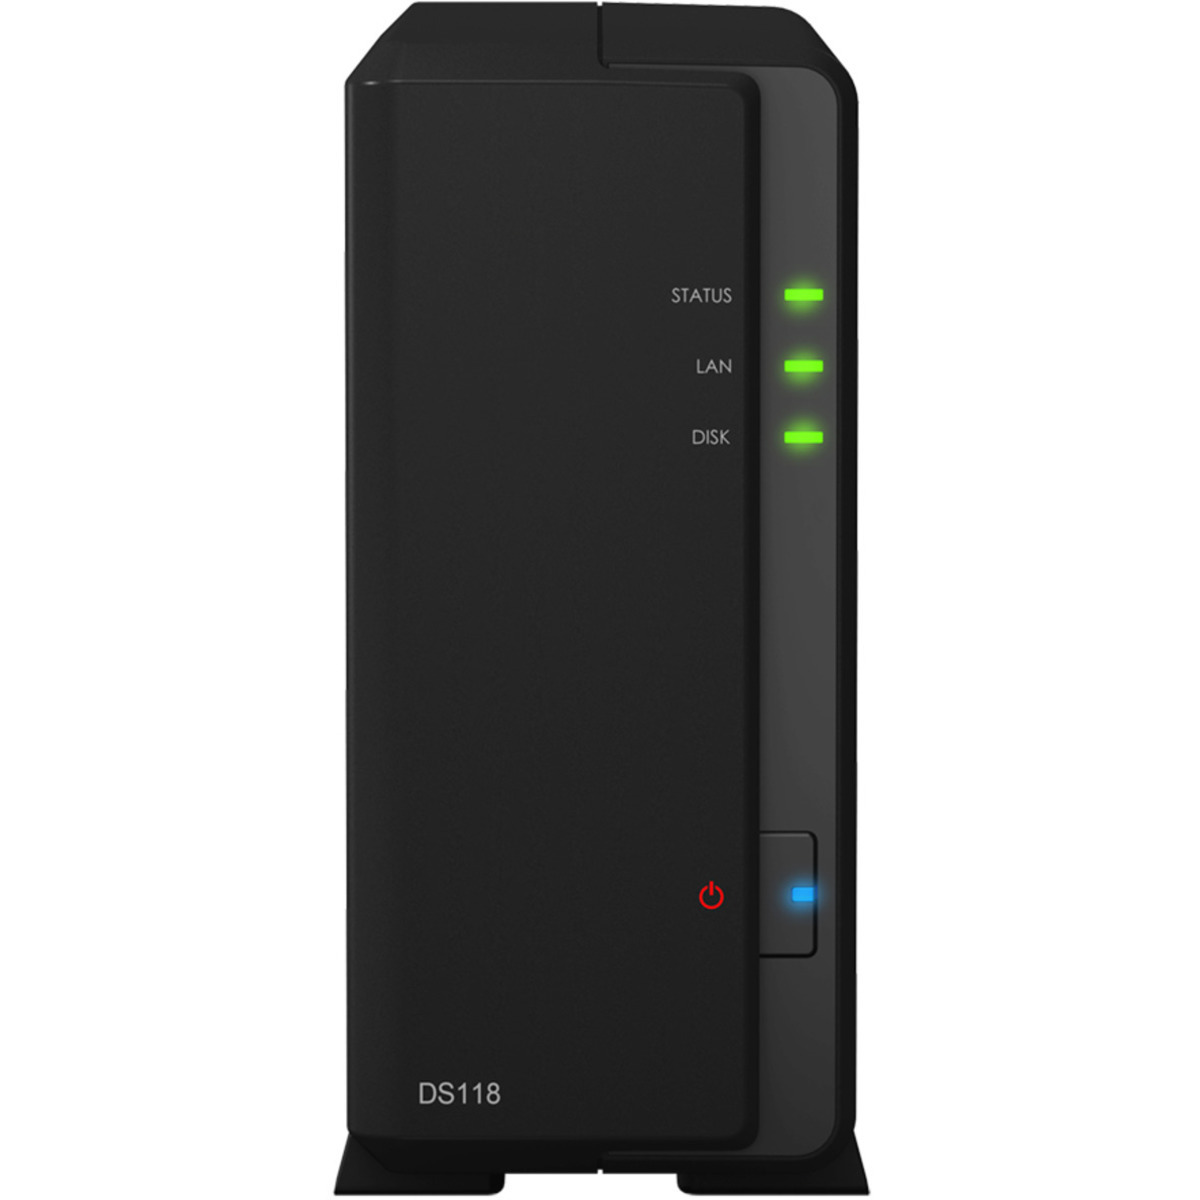 buy $681 Synology DiskStation DS118 18tb Desktop NAS - Network Attached Storage Device 1x18000gb Toshiba Enterprise Capacity MG09ACA18TE 3.5 7200rpm SATA 6Gb/s HDD ENTERPRISE Class Drives Installed - Burn-In Tested - nas headquarters buy network attached storage server device das new raid-5 free shipping usa christmas new year holiday sale DiskStation DS118